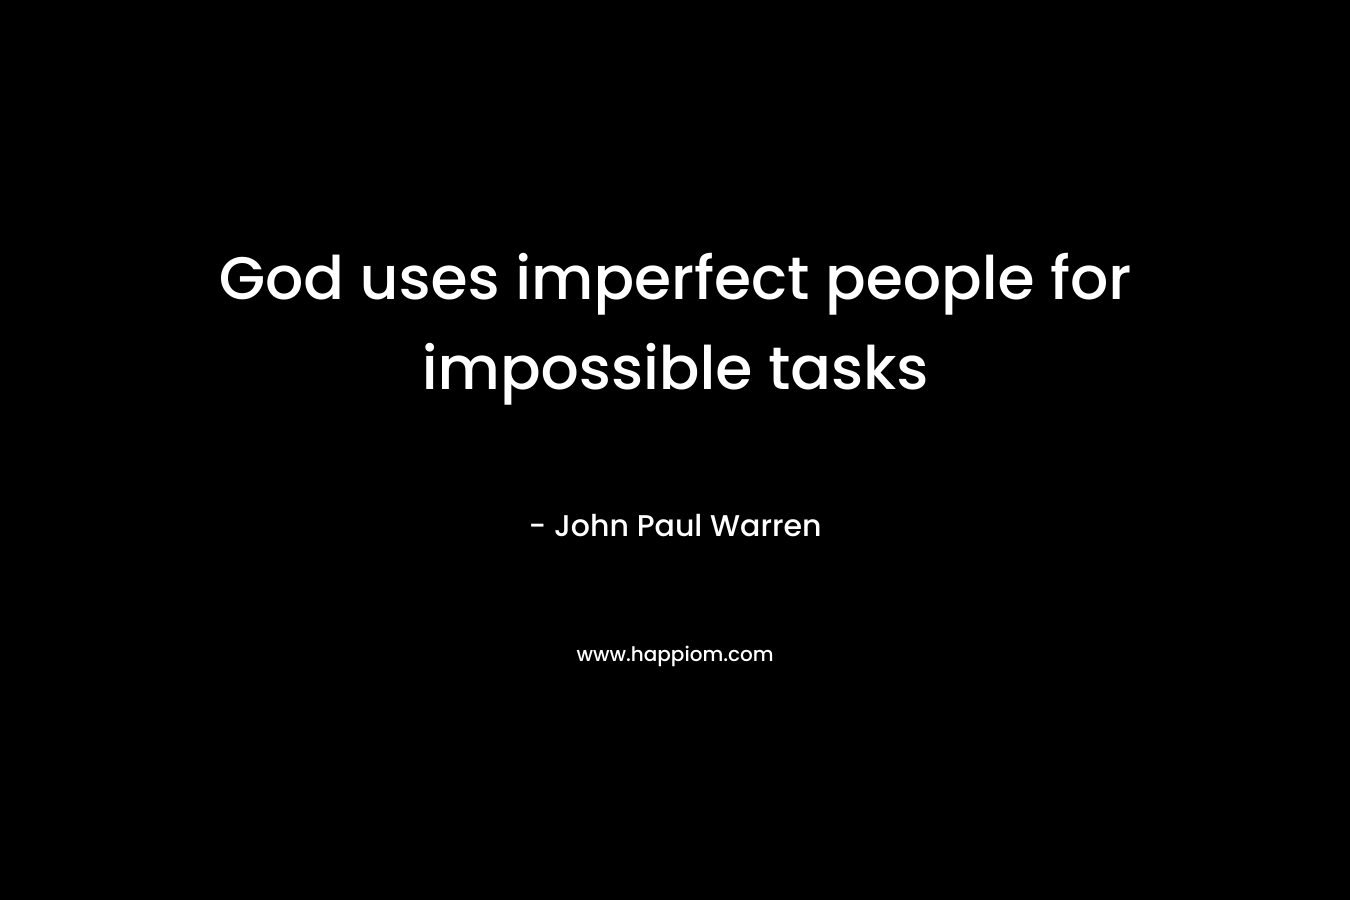 God uses imperfect people for impossible tasks